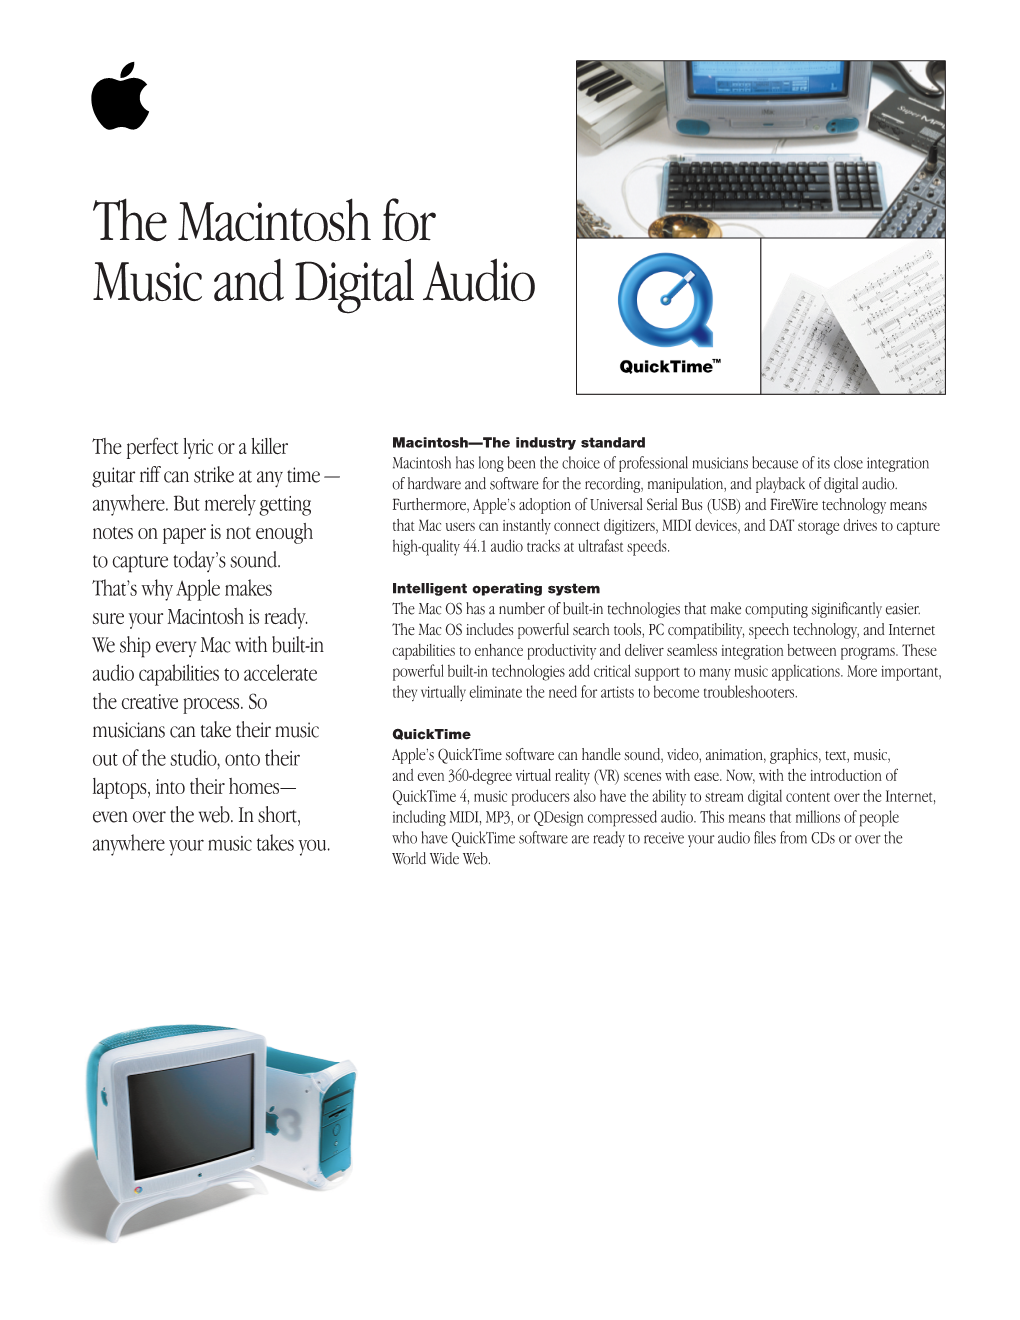 The Macintosh for Music and Digital Audio